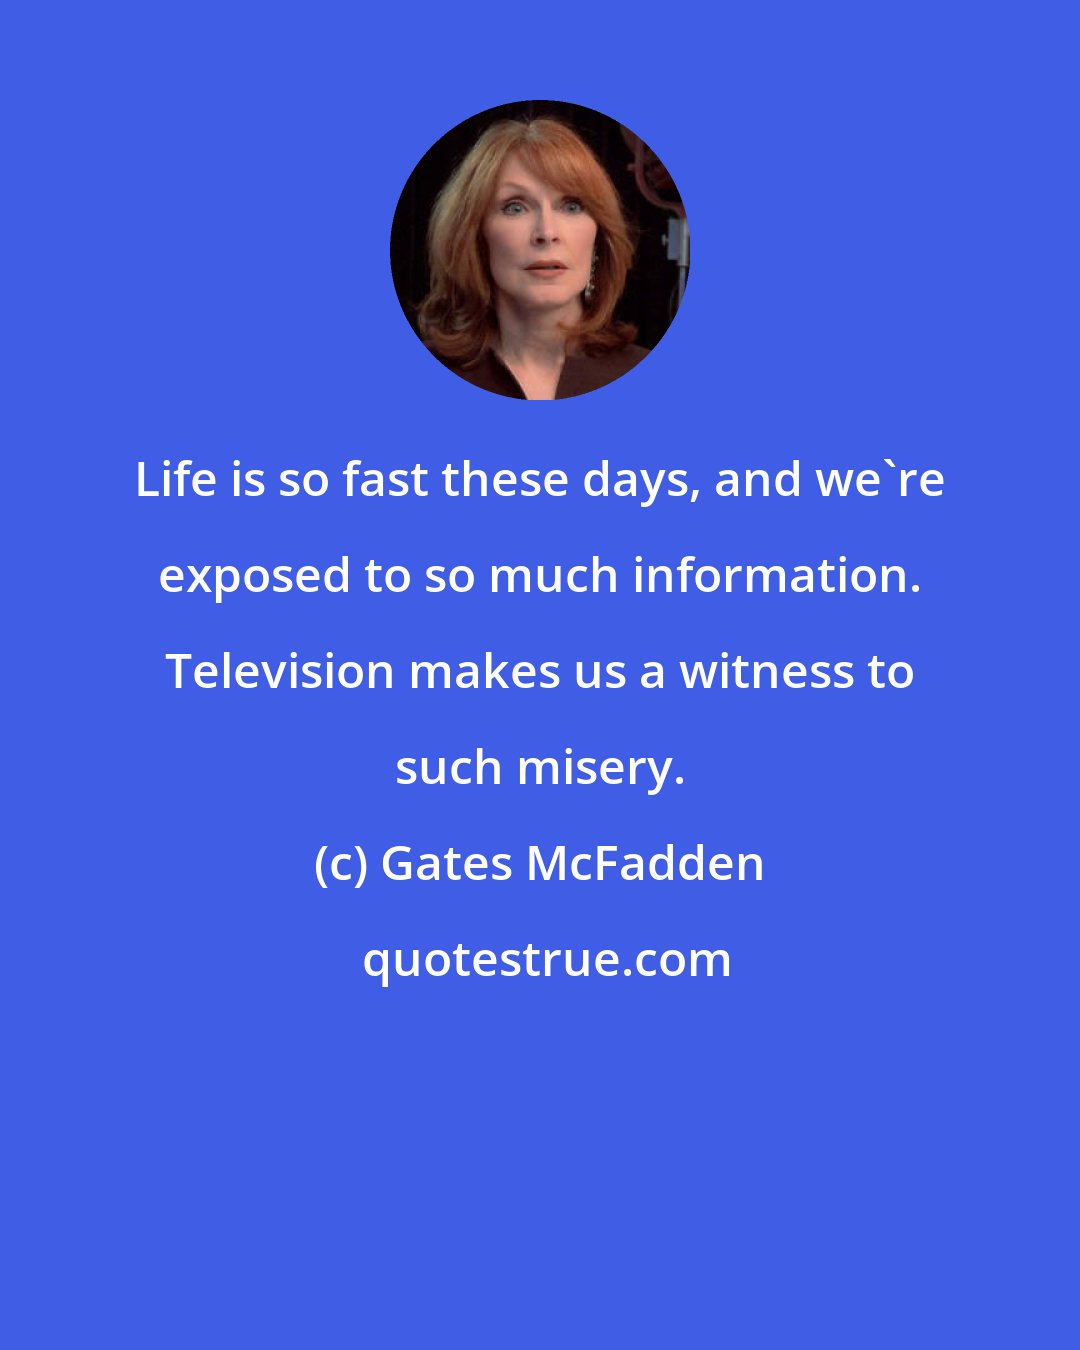 Gates McFadden: Life is so fast these days, and we're exposed to so much information. Television makes us a witness to such misery.